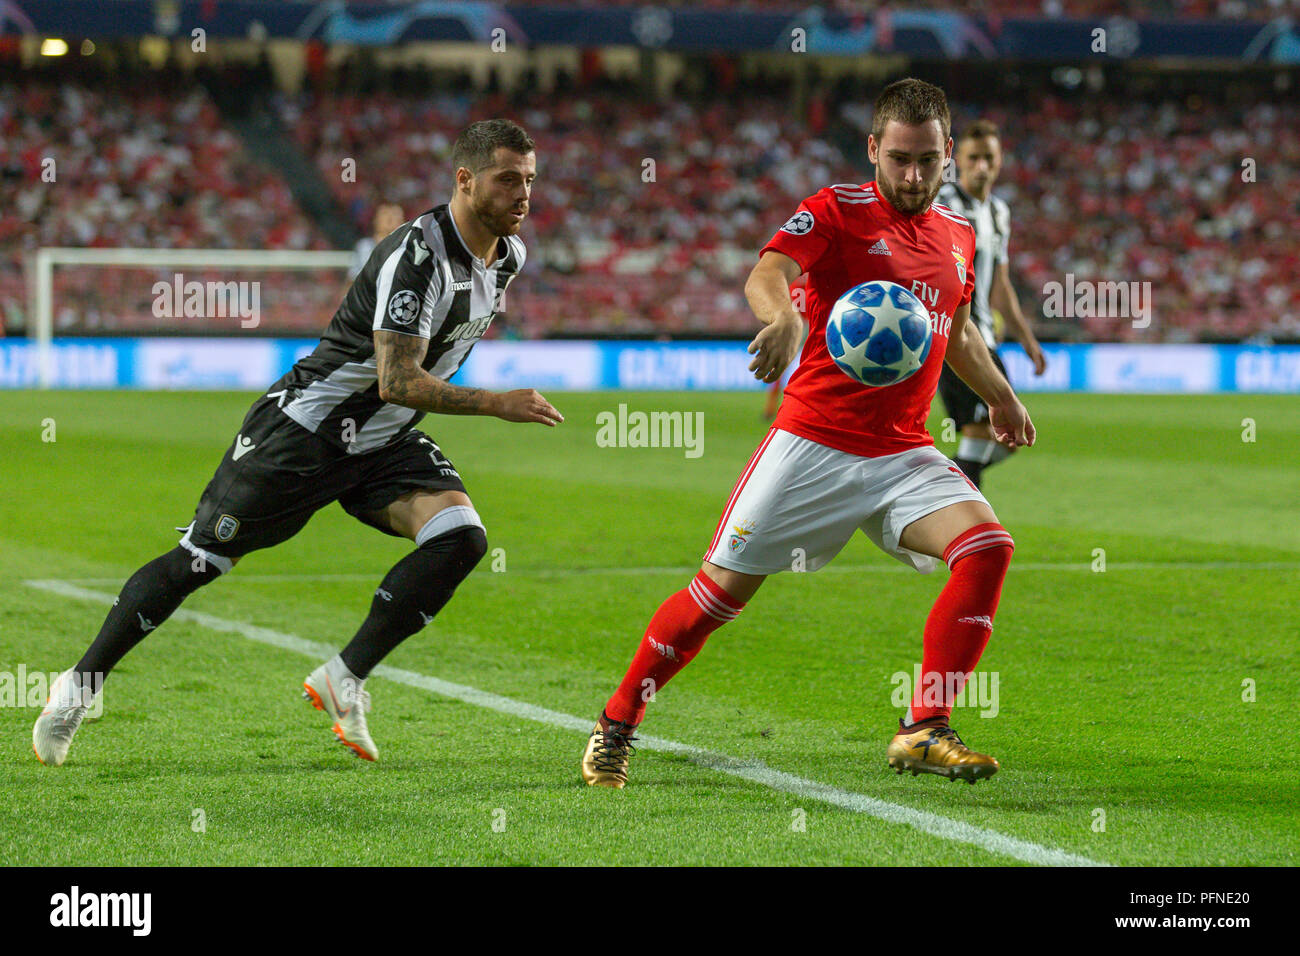 Lisbon, Portugal. August 21, 2018. Benfica's forward from Serbia Andrika Zivkovic (17) and PAOK's defender from Portugal Vieirinha (20) during the game of the 1st leg of the Playoffs of the UEFA Champions League, SL Benfica vs PAOK © Alexandre de Sousa/Alamy Live News Stock Photo